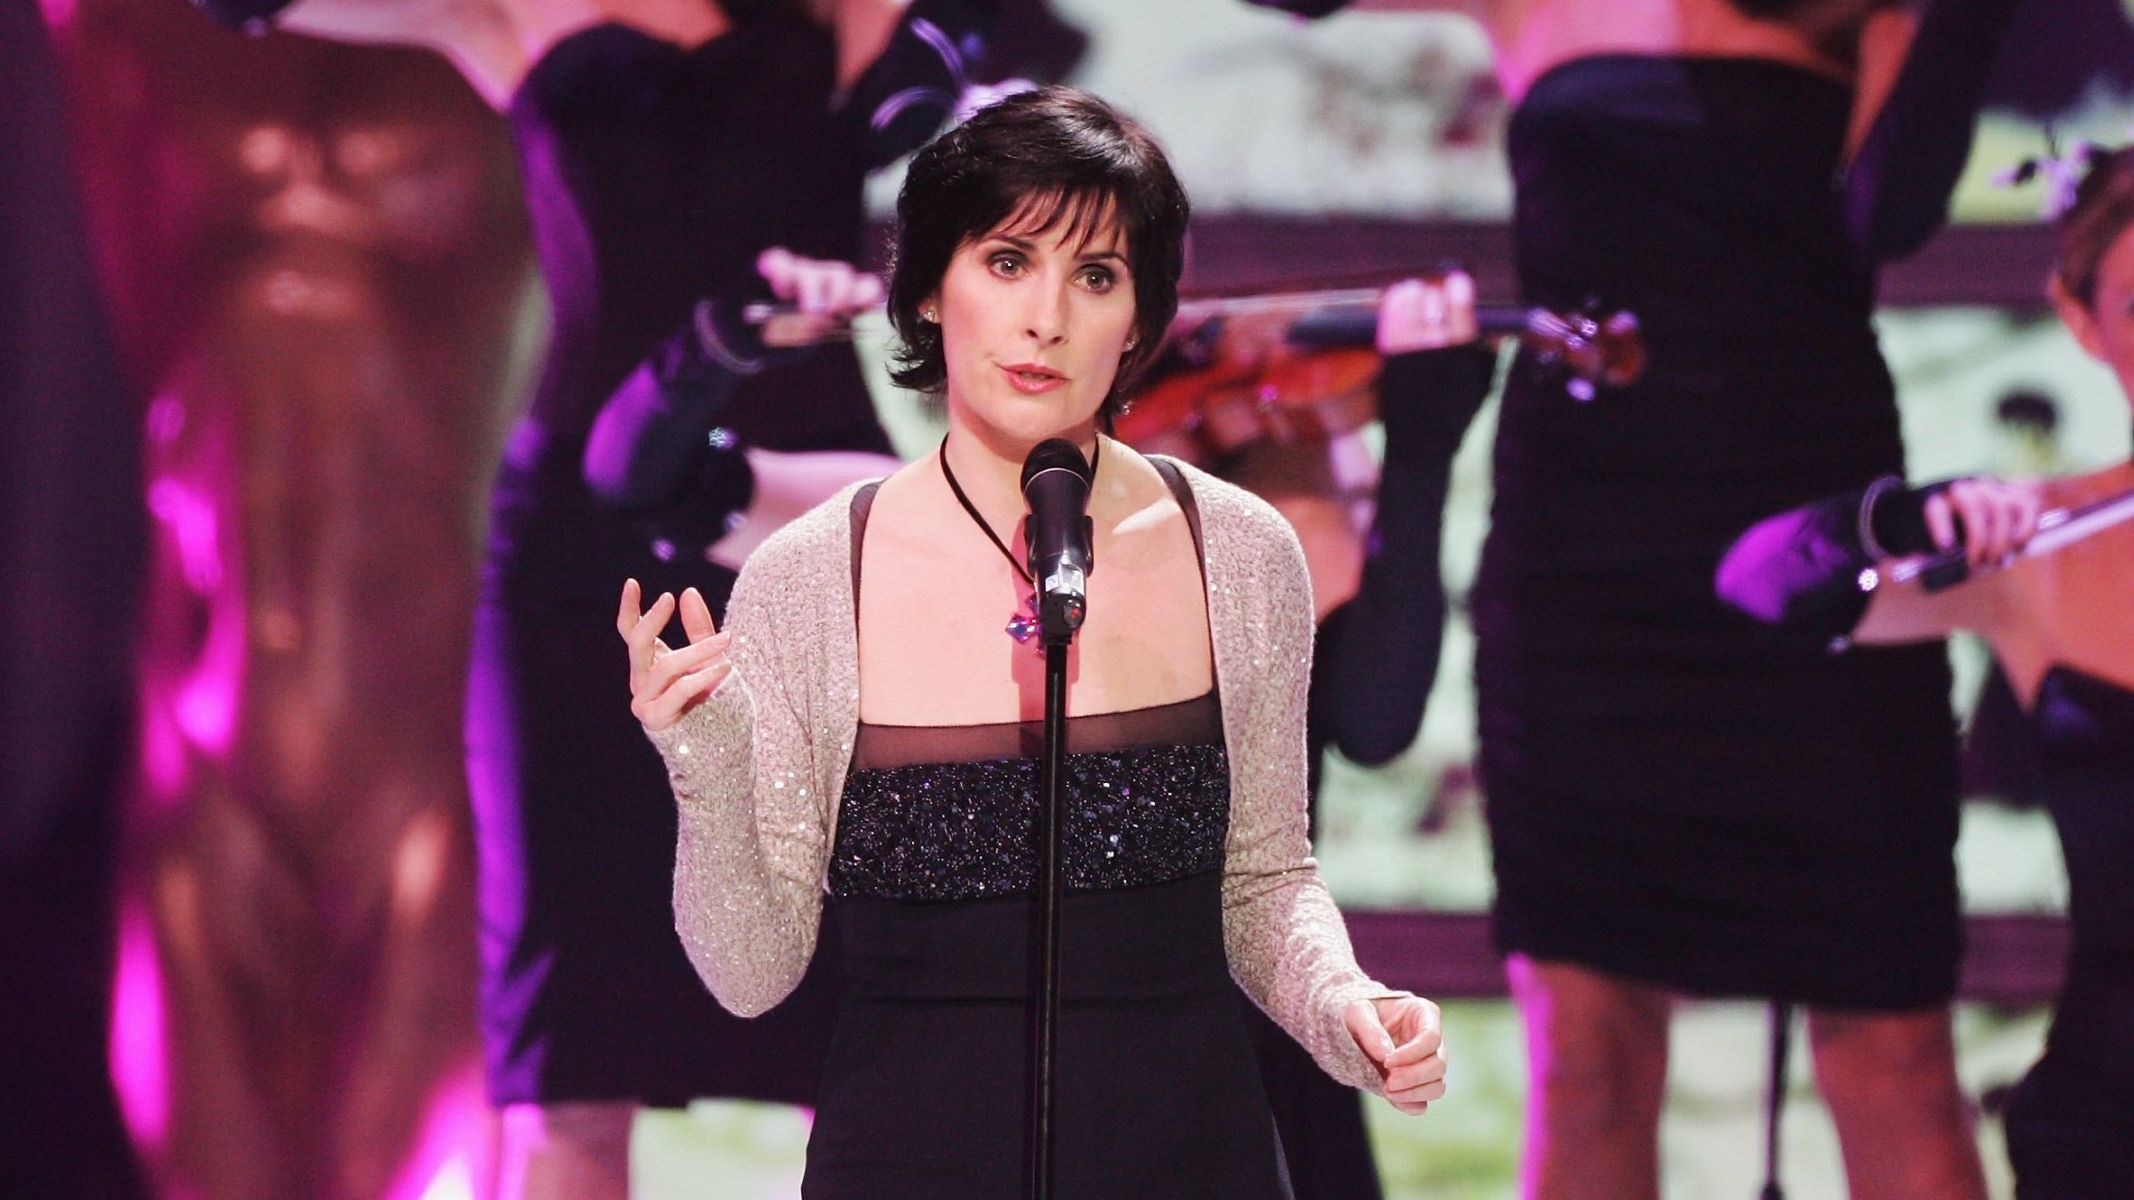 24-astounding-facts-about-enya